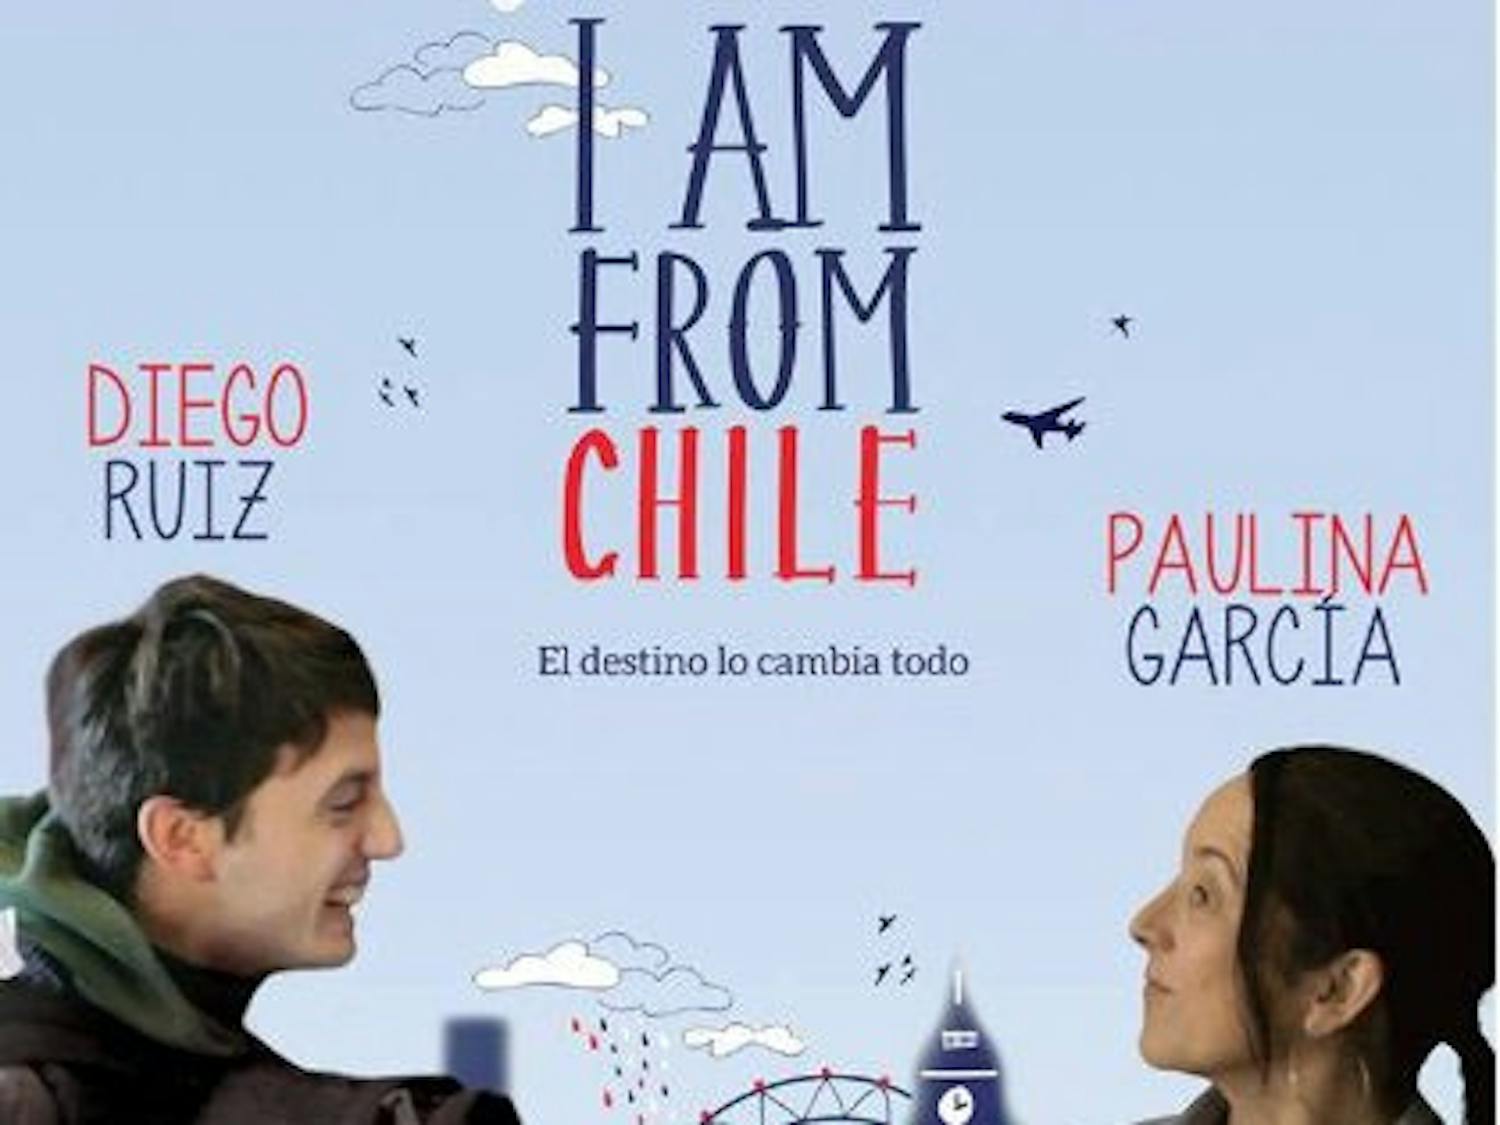 "I Am From Chile" (2013).